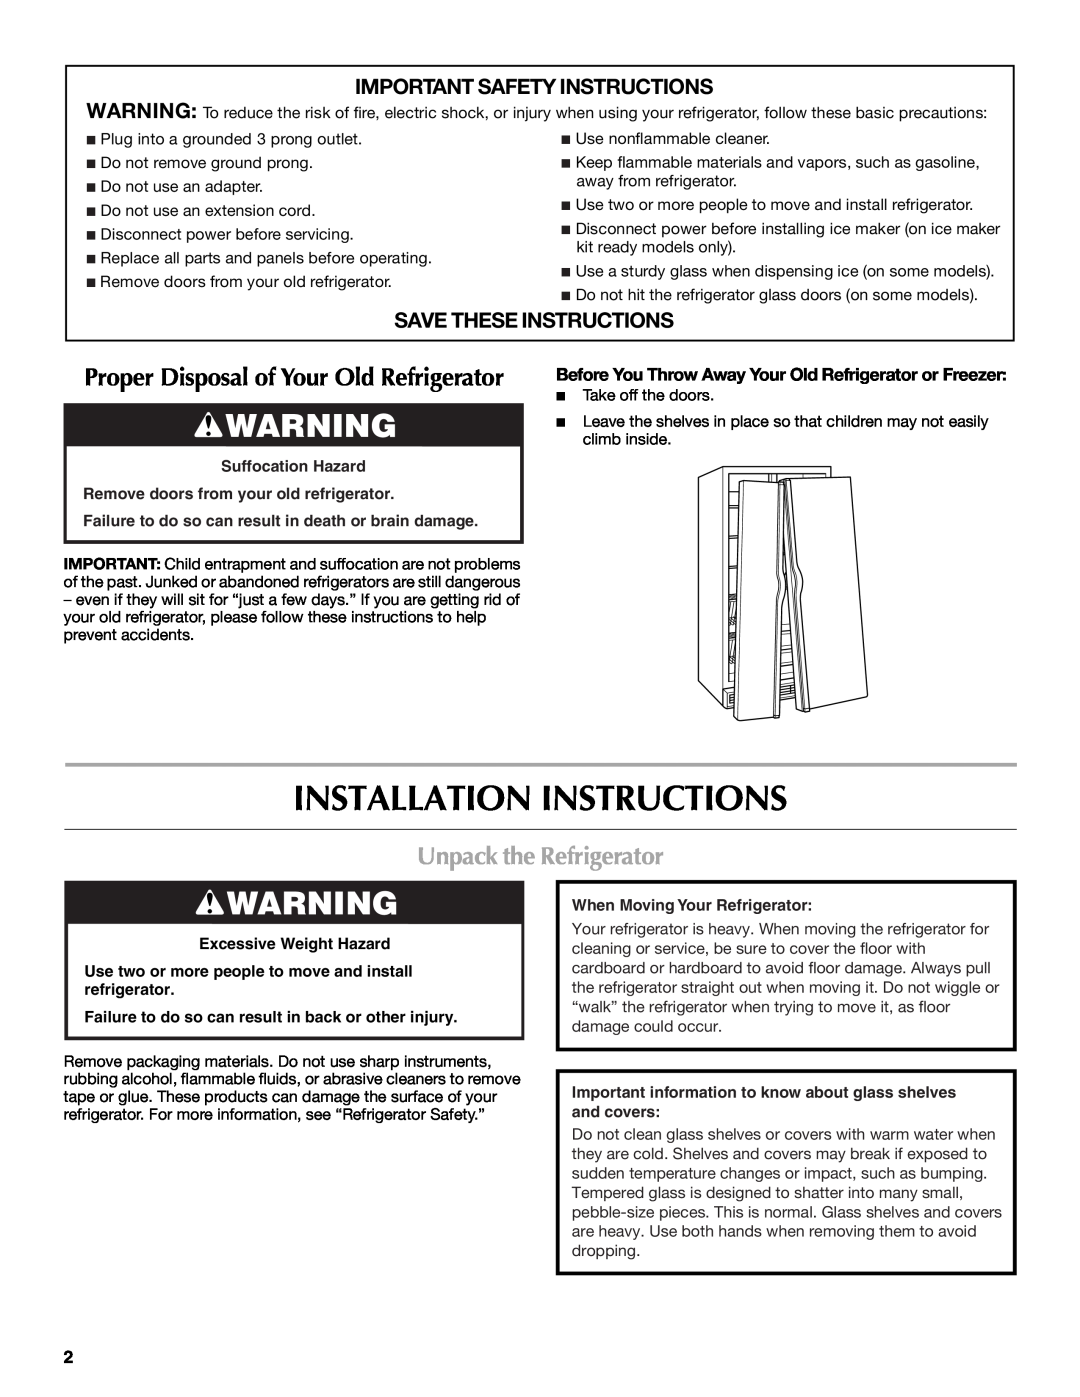 Maytag W10321476A Installation Instructions, Unpack the Refrigerator, Important Safety Instructions 